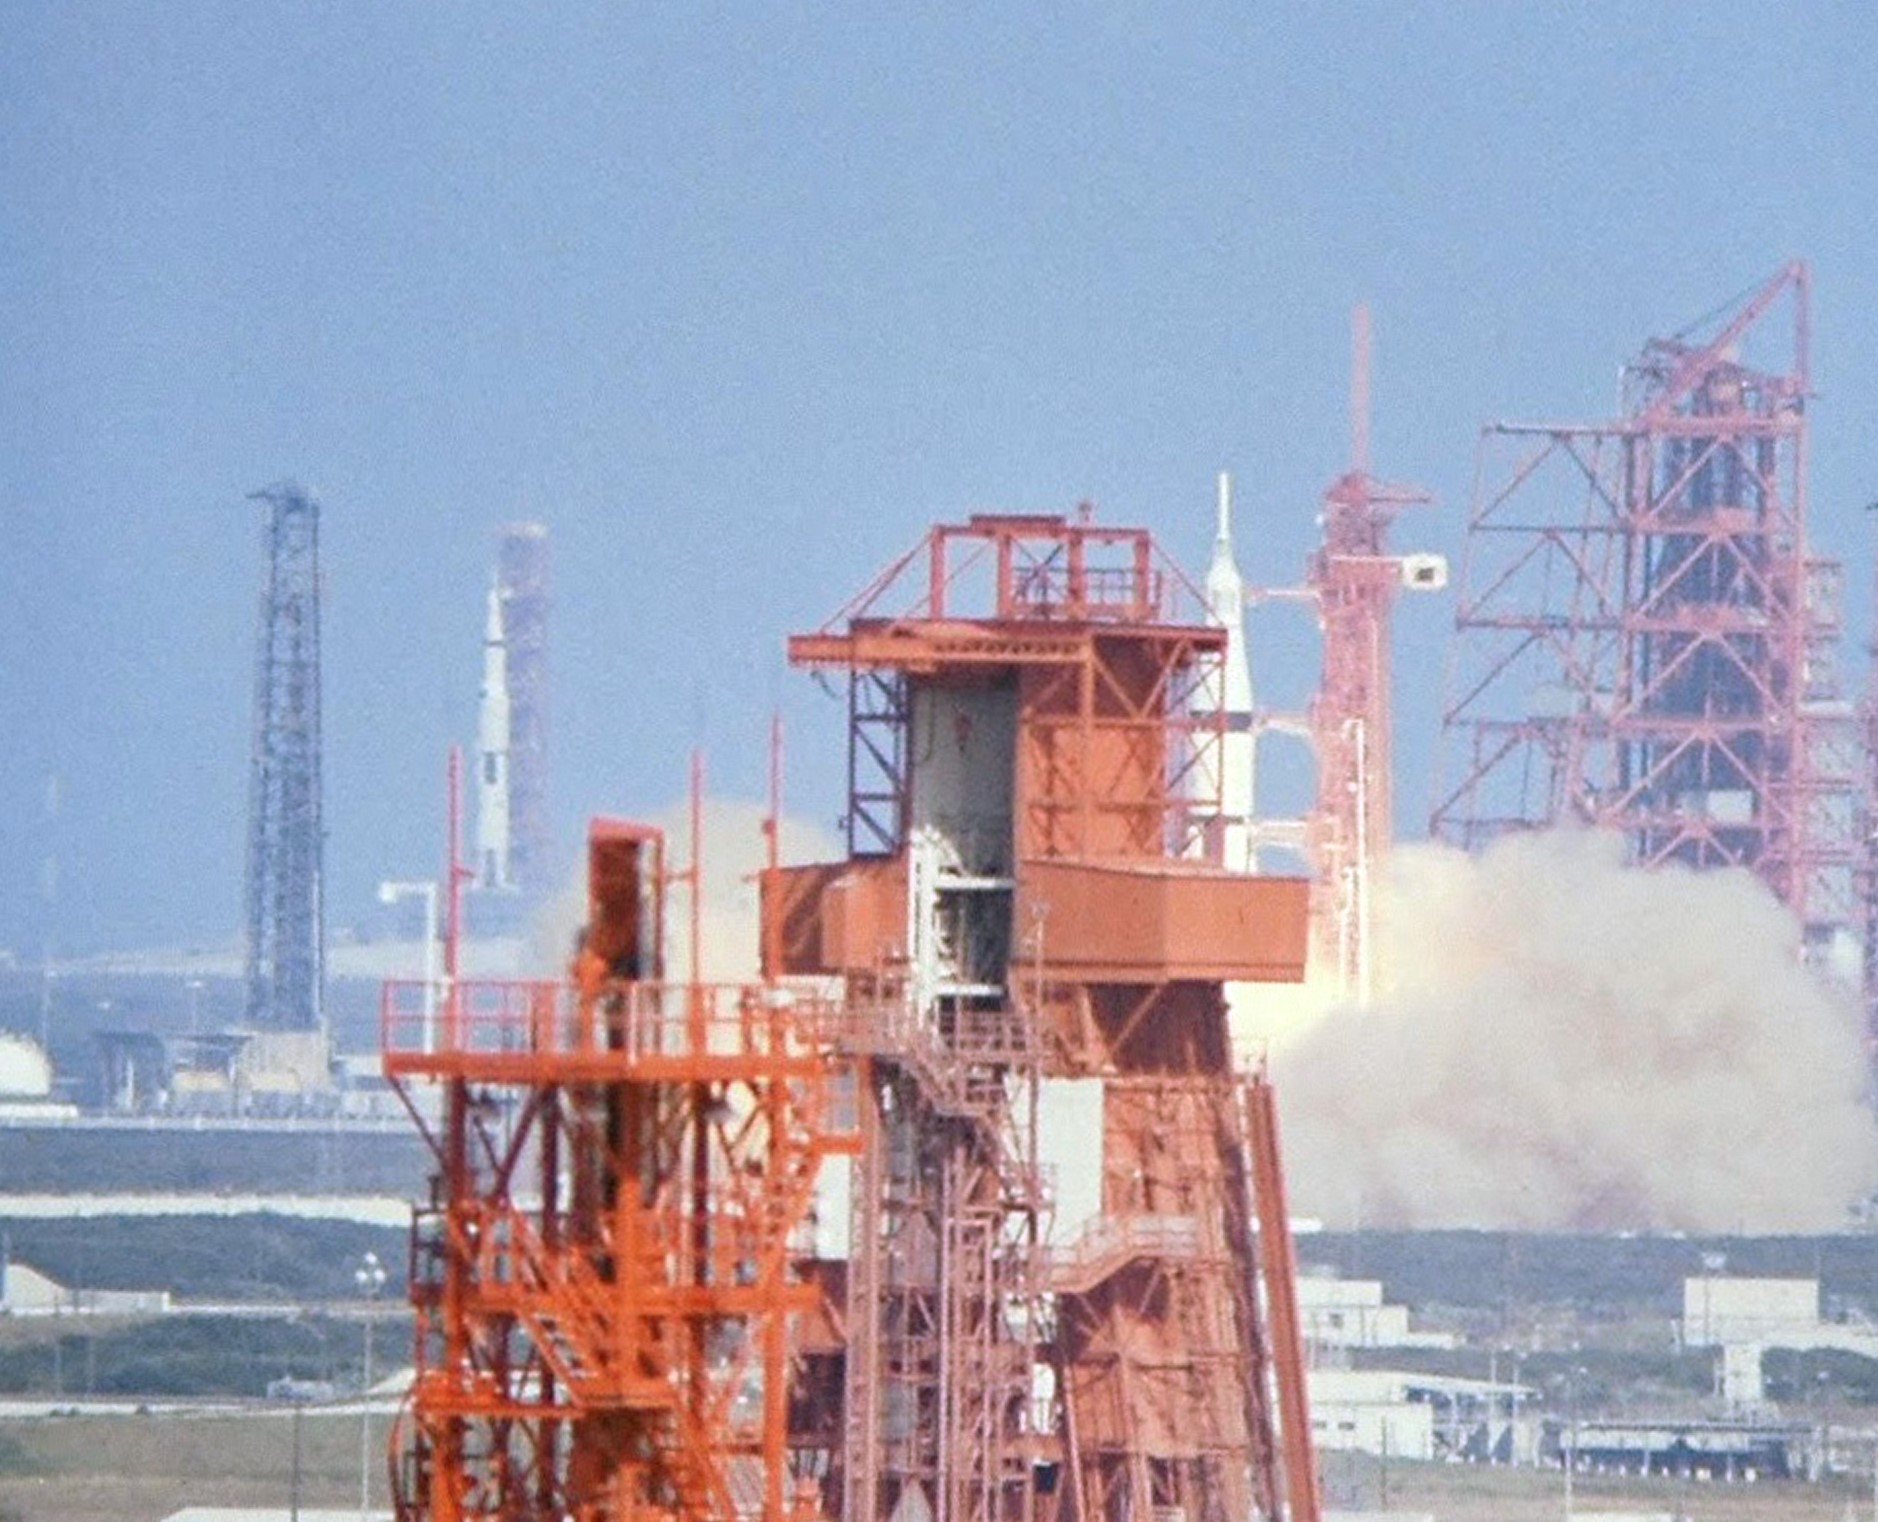 View of Apollo 7 lifting off from Launch Pad 34